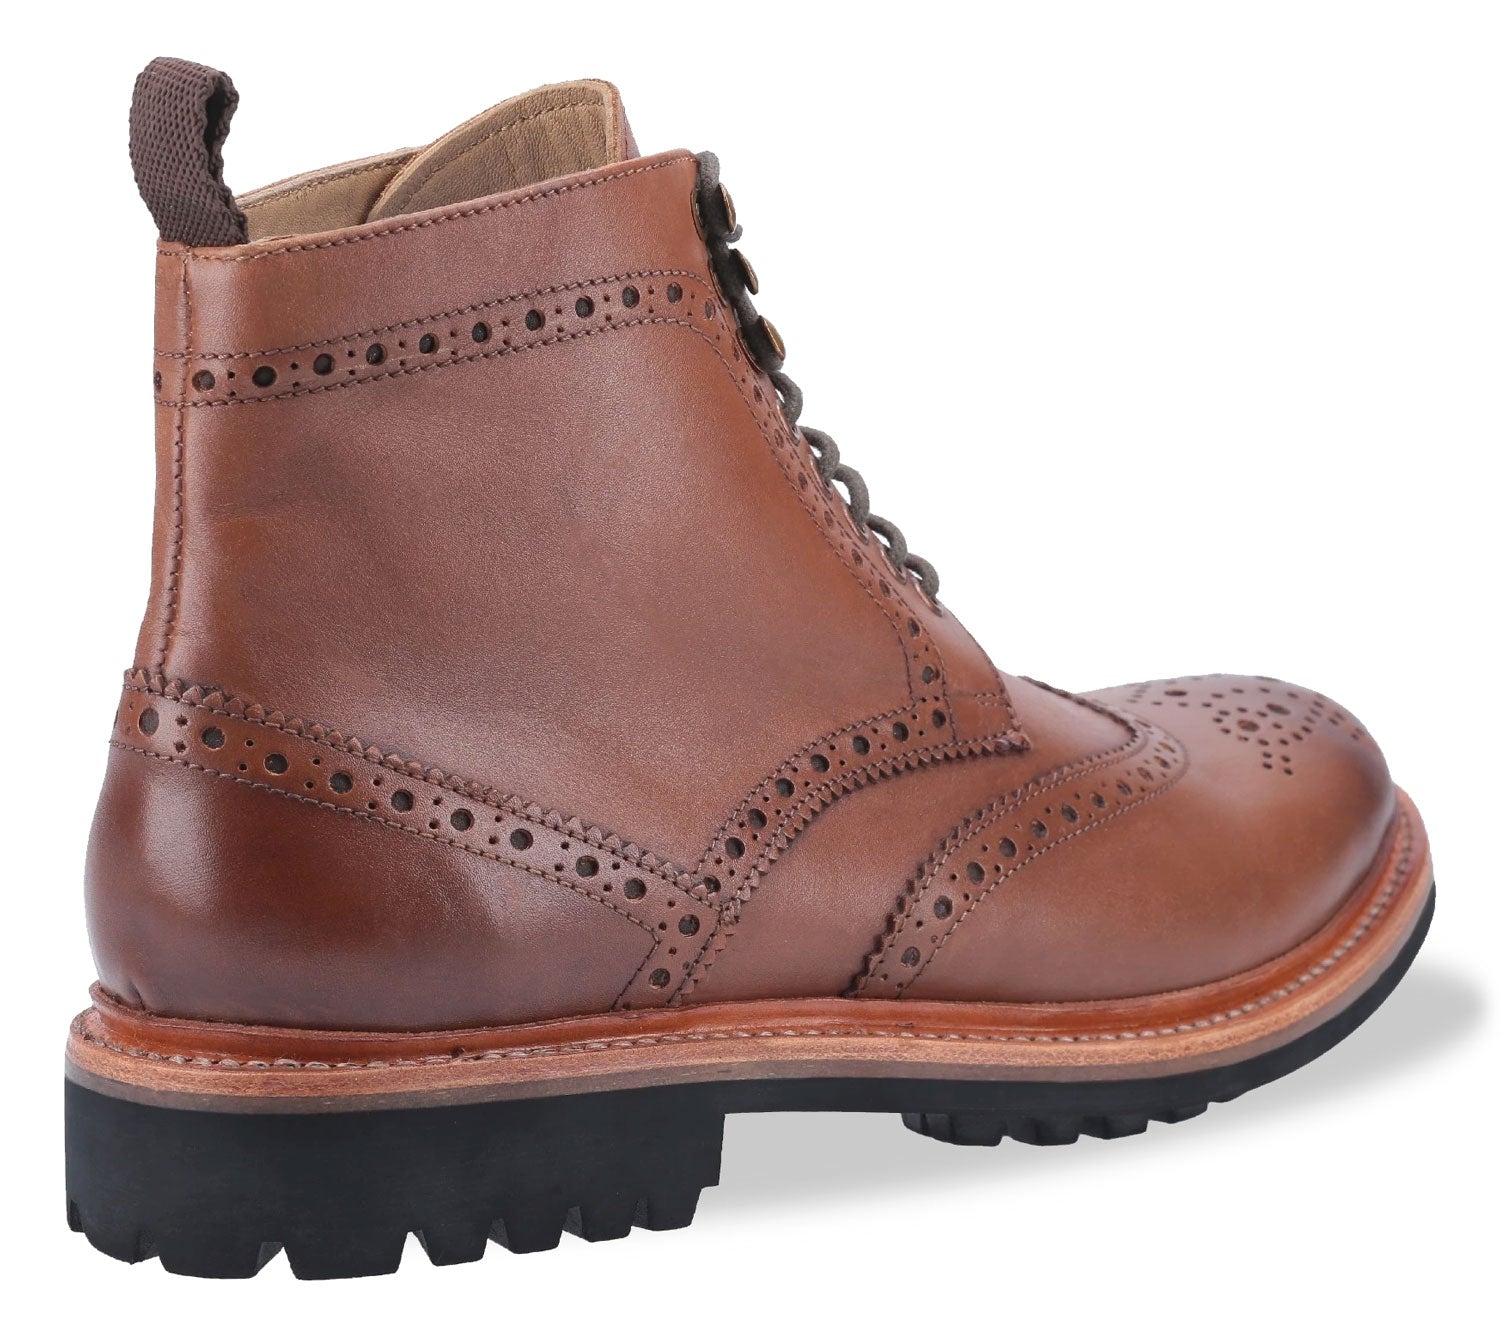 Burnished brown with leather welt goodyear sole 